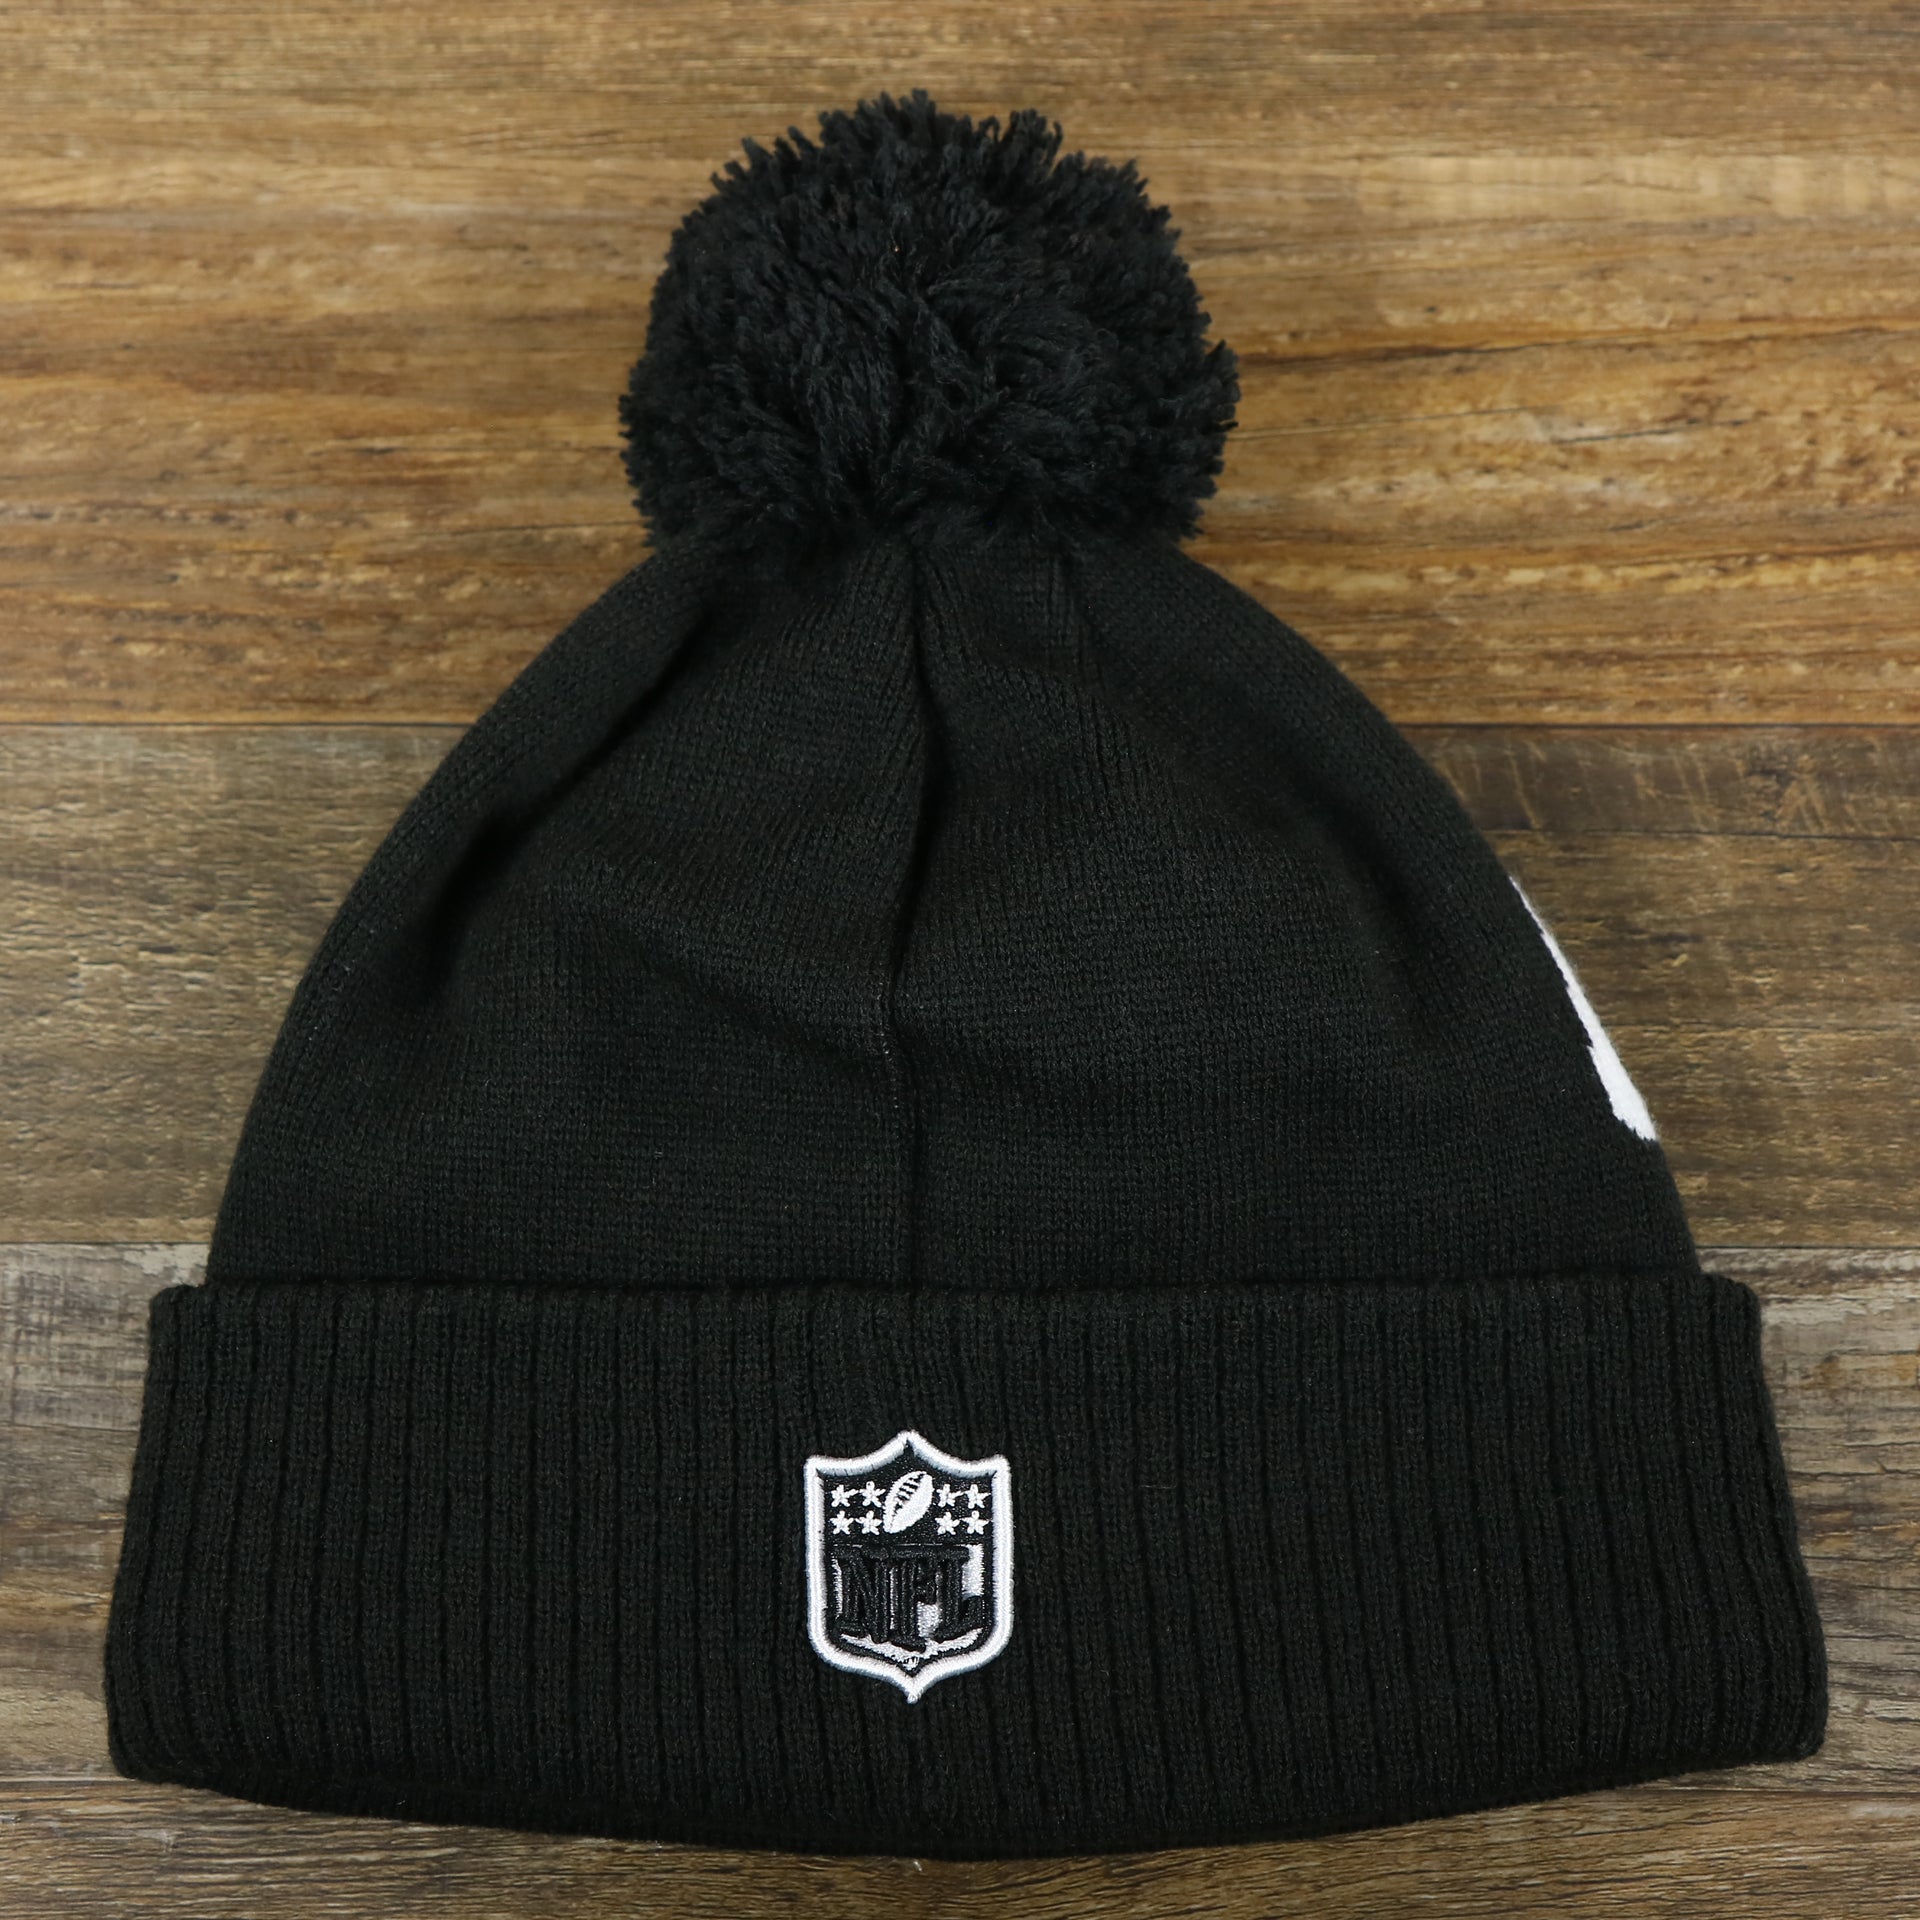 The backside of the Dallas Cowboys On Field Rubber Cowboys 1960 Patch Cuffed Pom Pom Winter Beanie | Black Winter Beanie